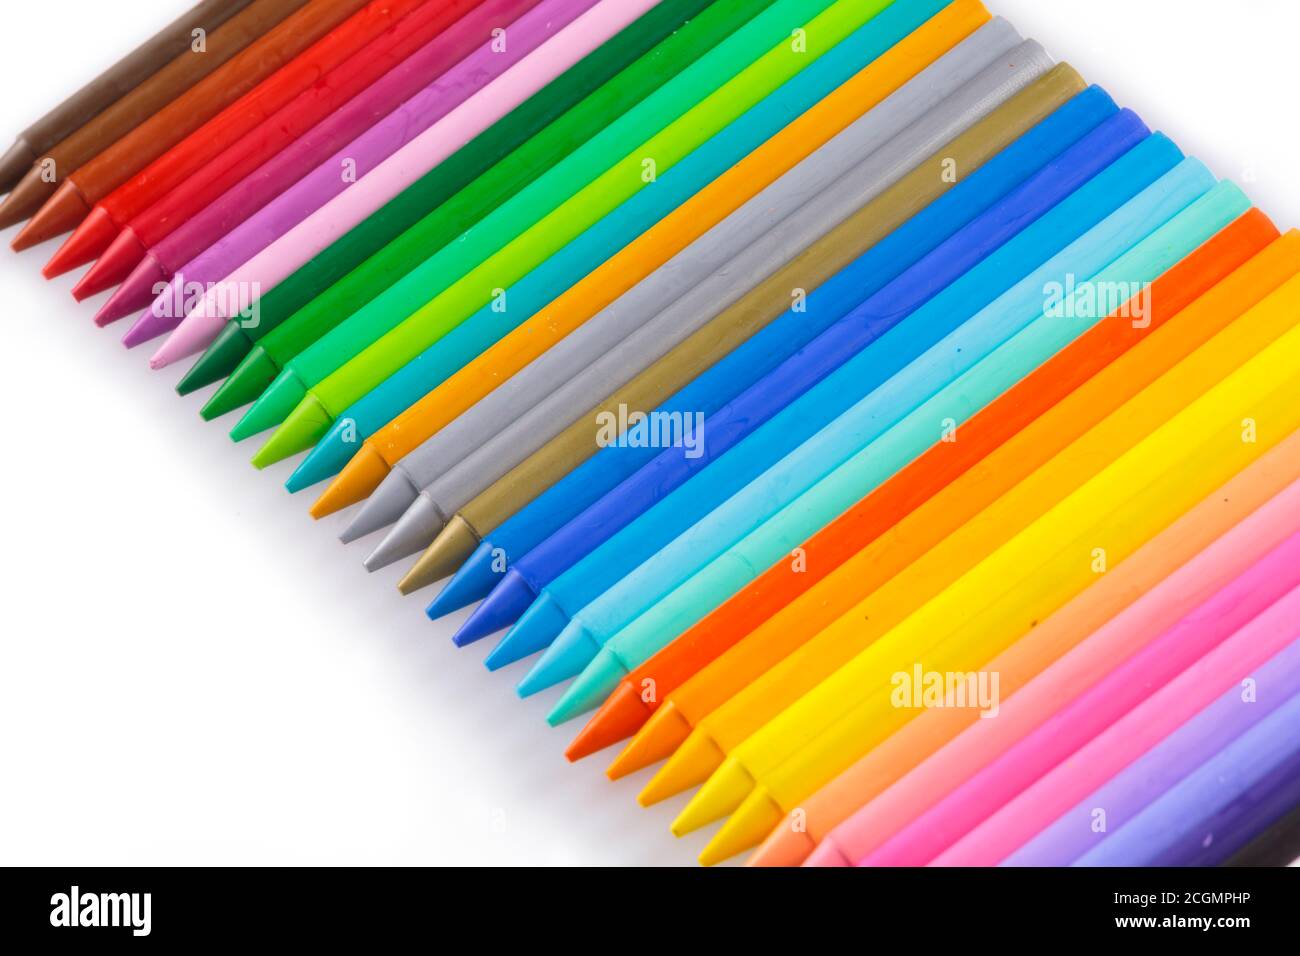 Colorful arrangement of wax pencil crayons Stock Photo